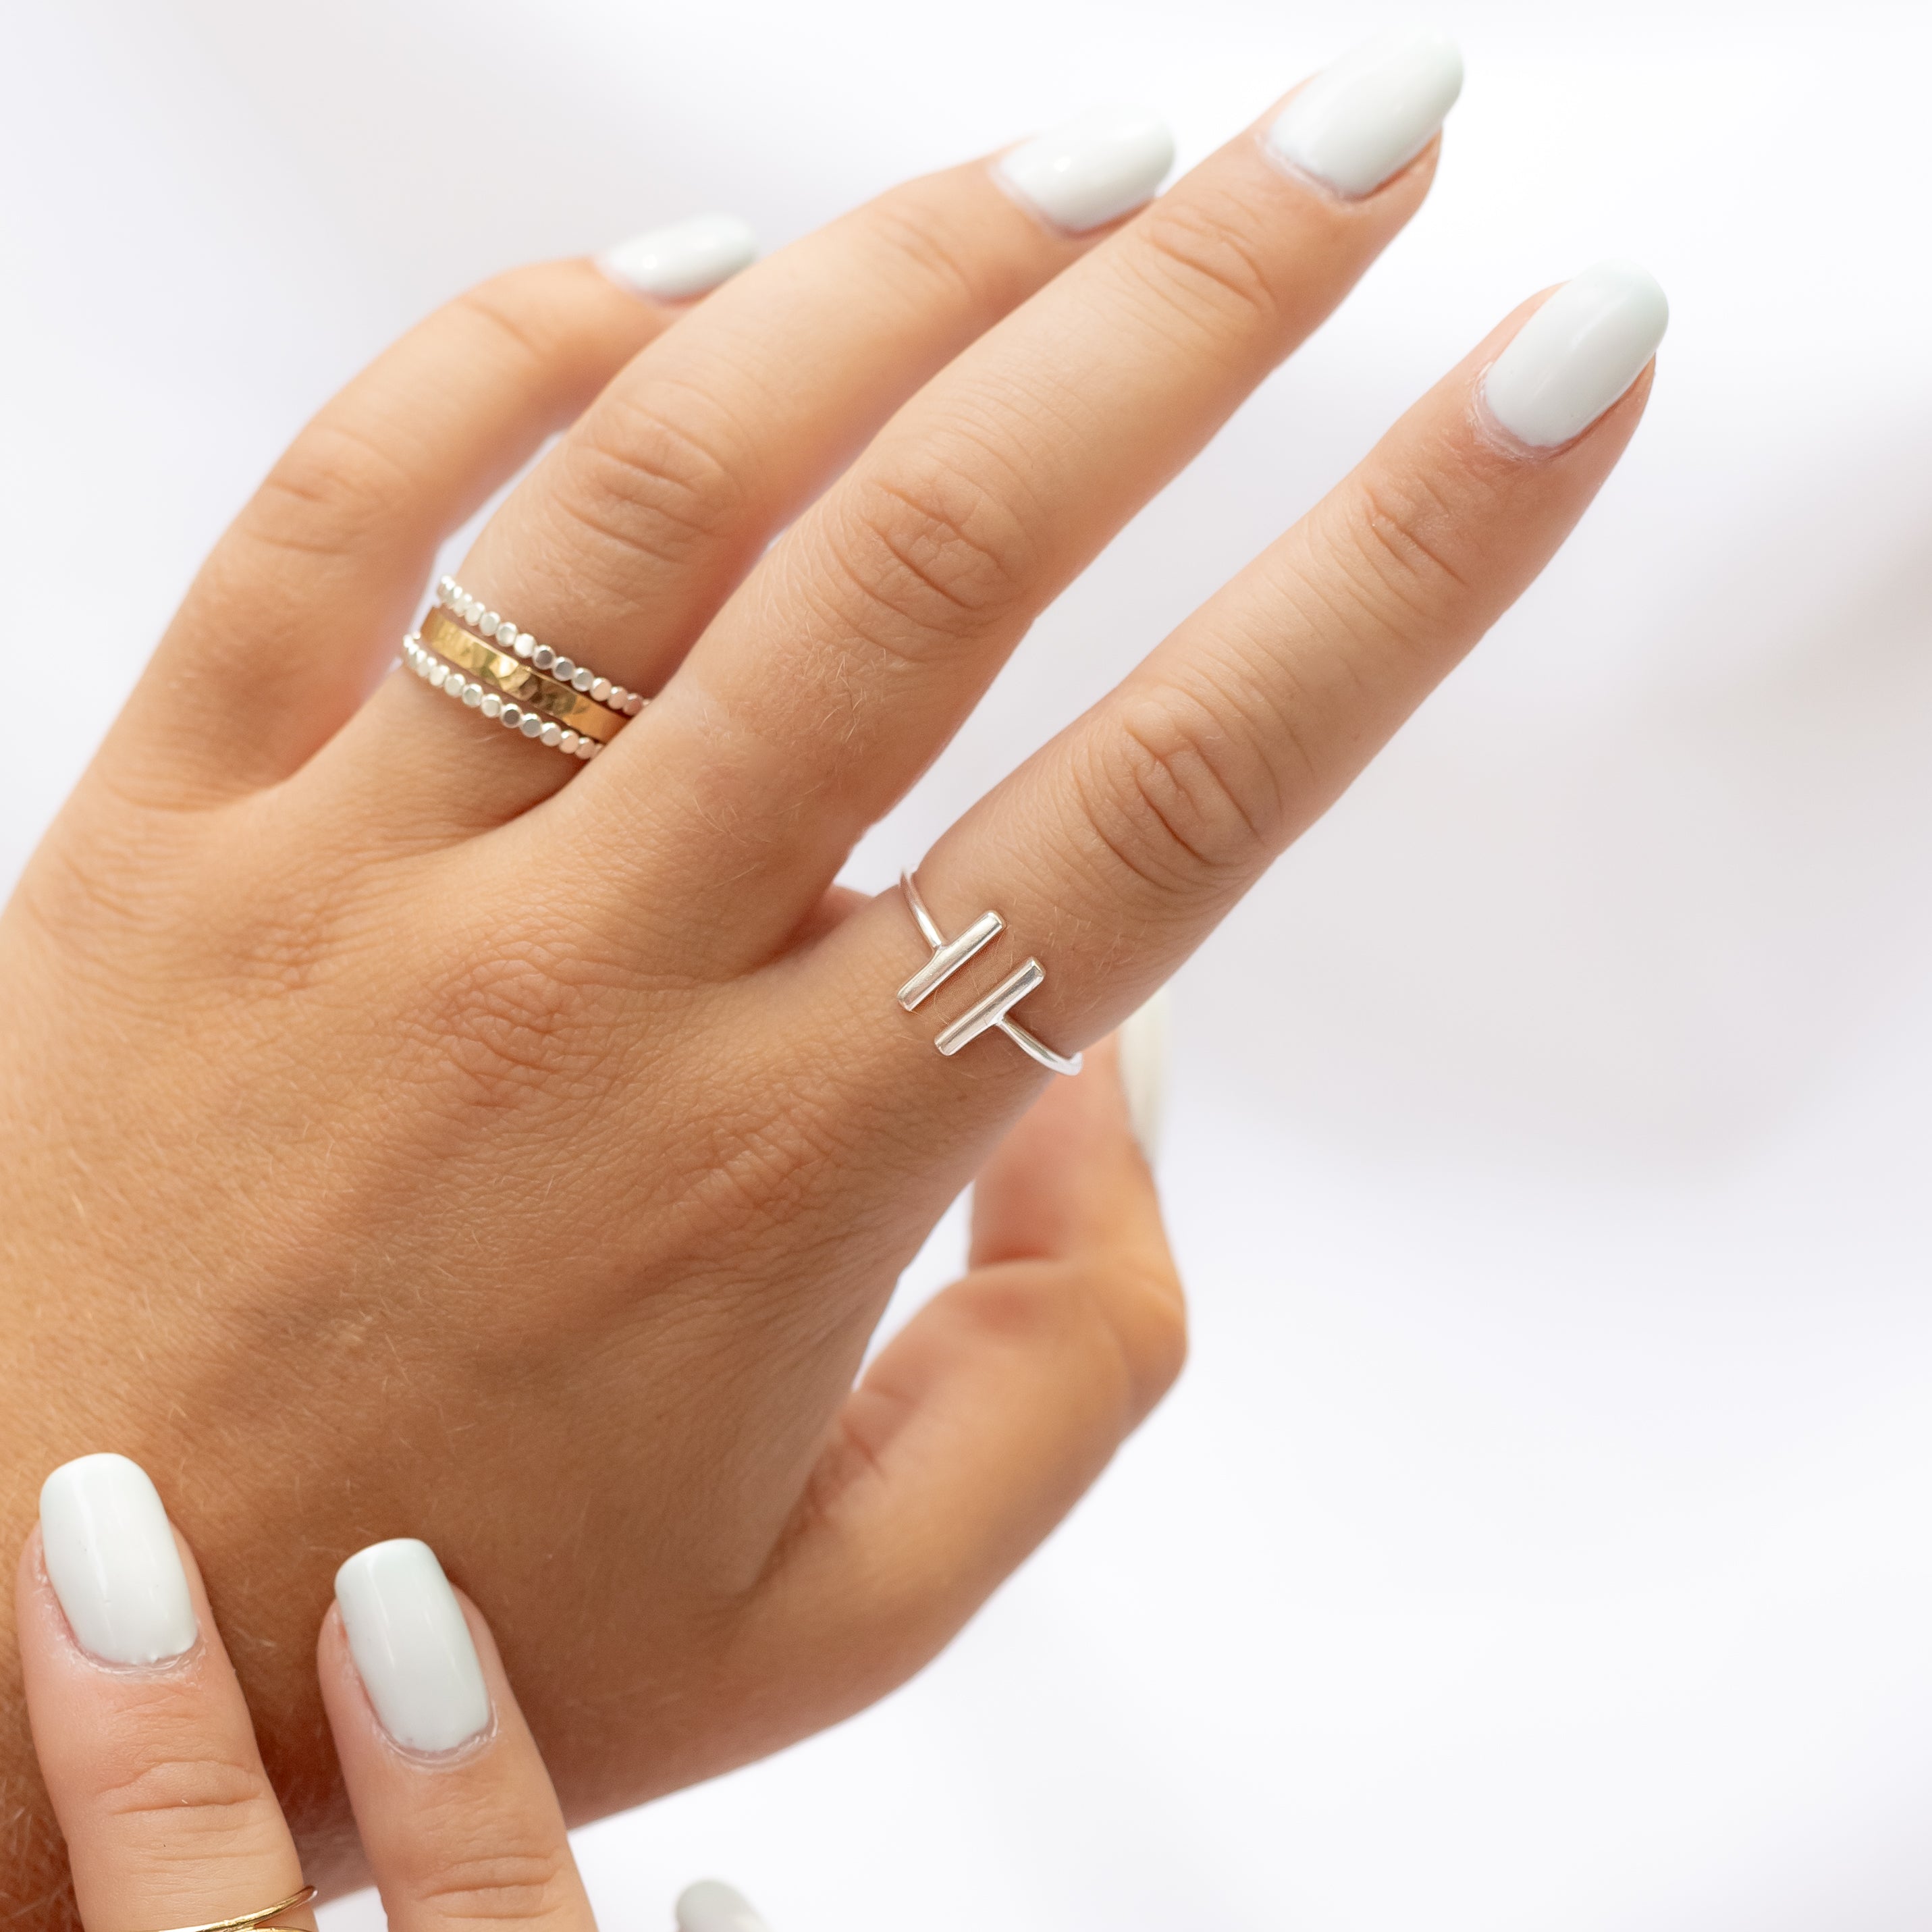 Sterling silver double bar ring shown on a woman's pointers finger. 